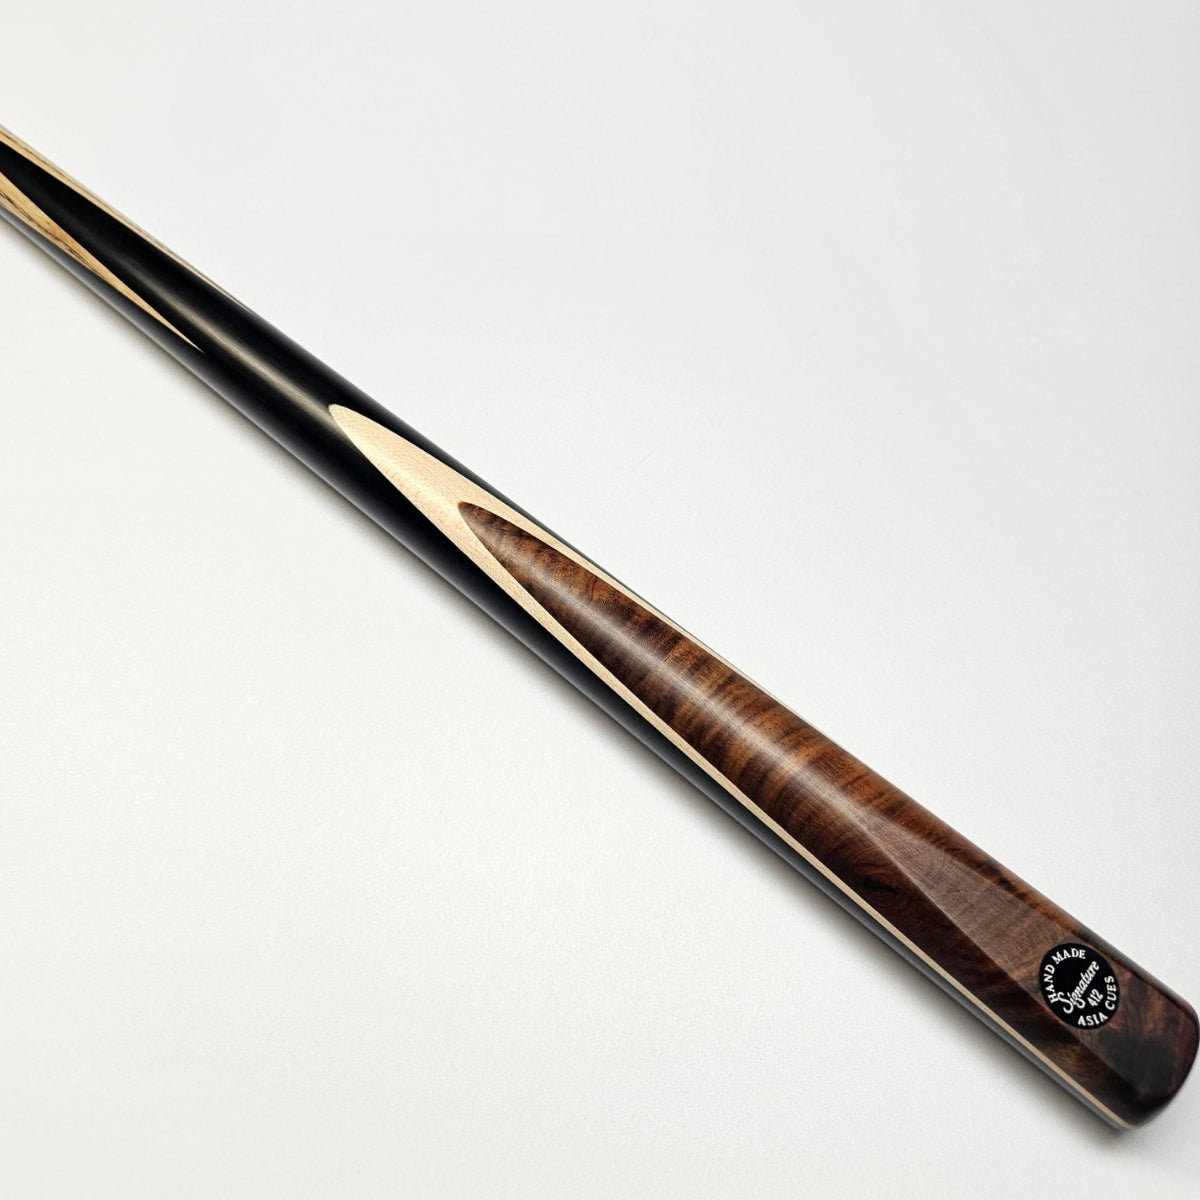 Asia Cues Signature One Piece Snooker Cue  Handmade Ebony Butt with Front splice of Siam Rosewood and Thick Maple Veneer. Butt view